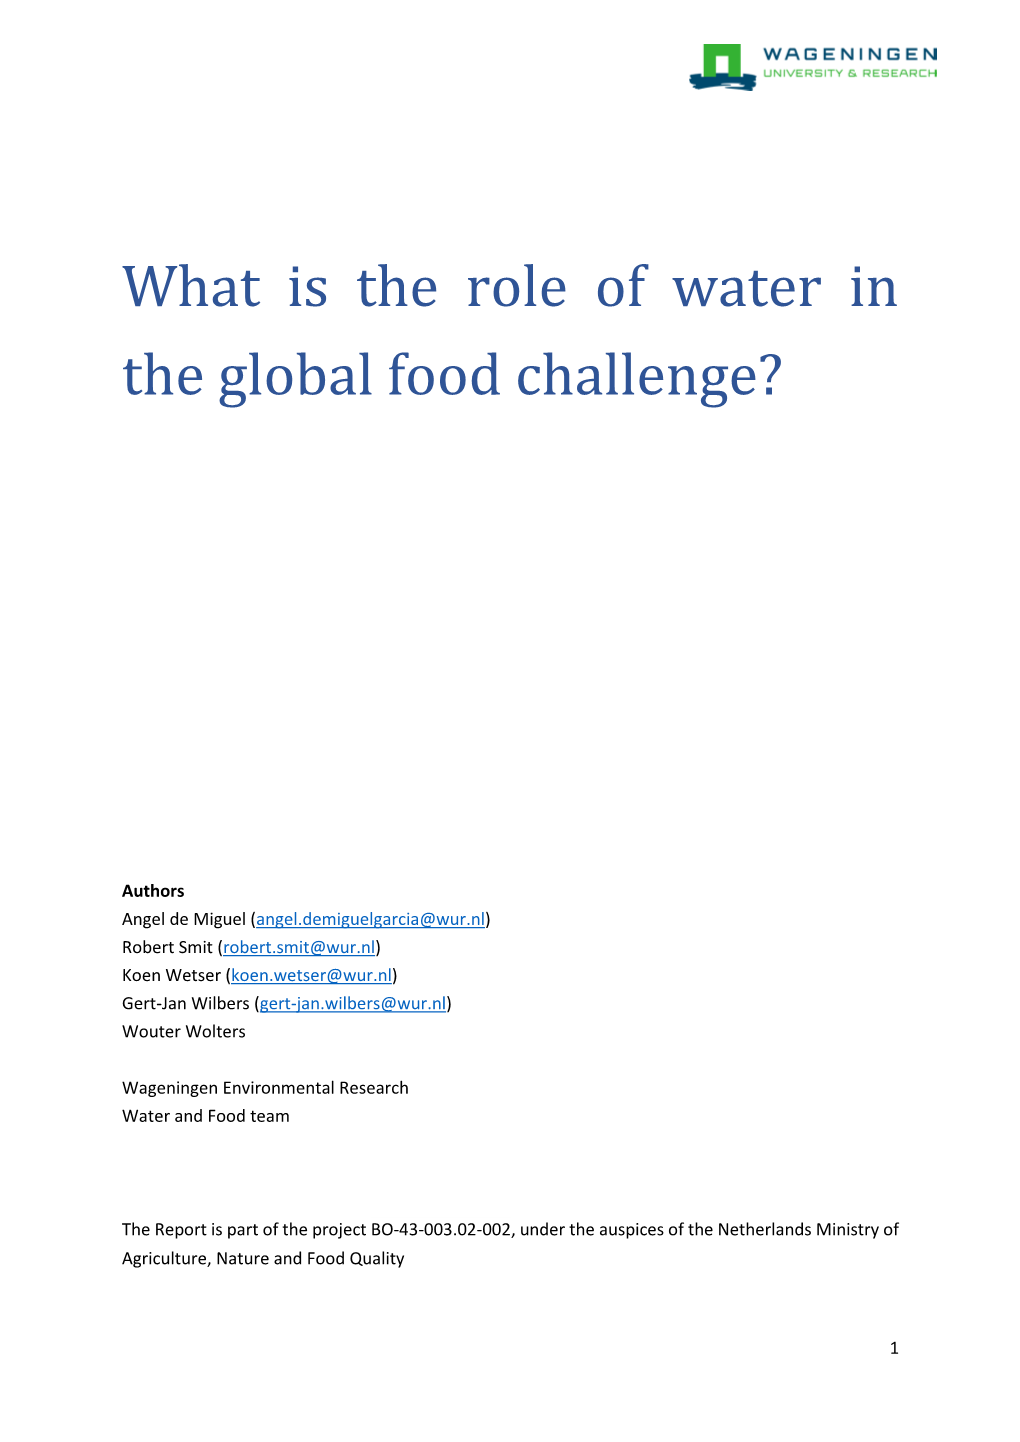 What Is the Role of Water in the Global Food Challenge?